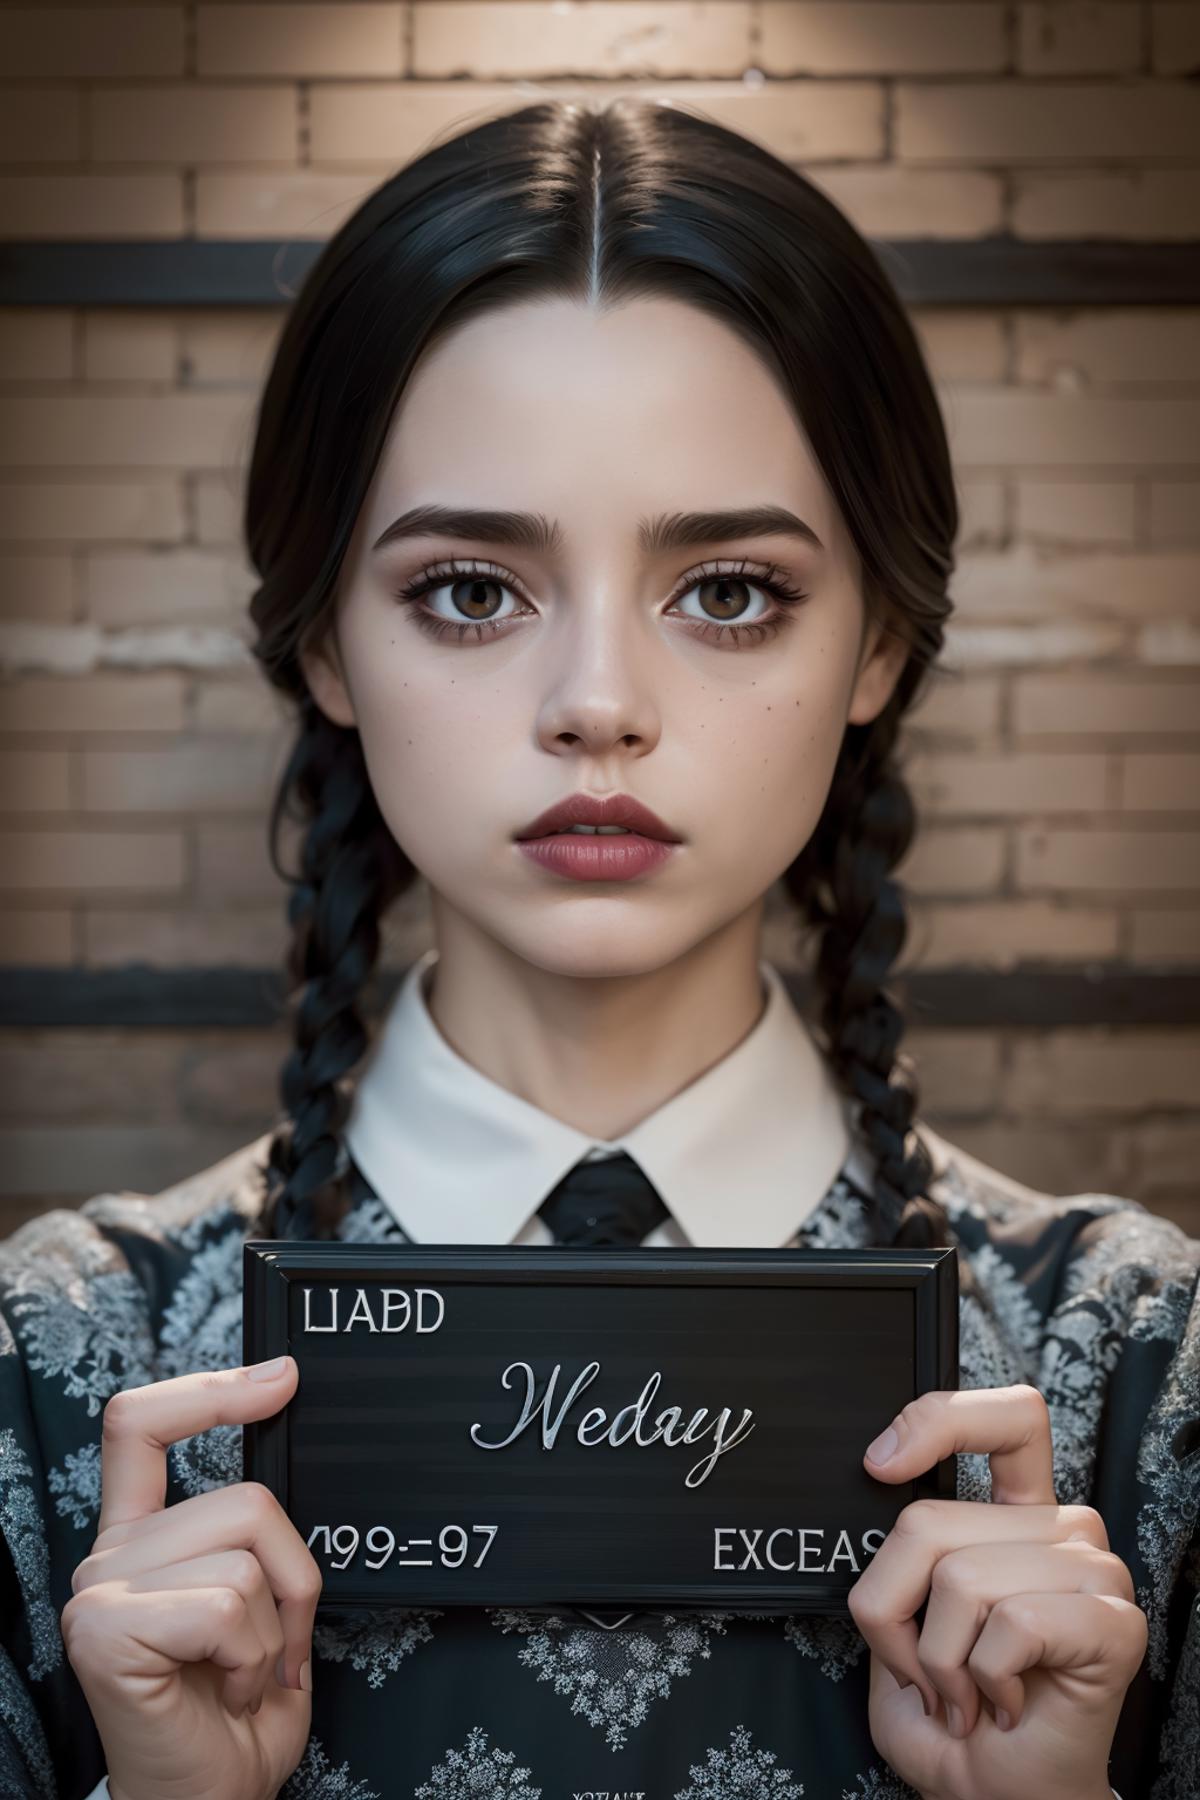 Wednesday Addams image by RubberDuckie